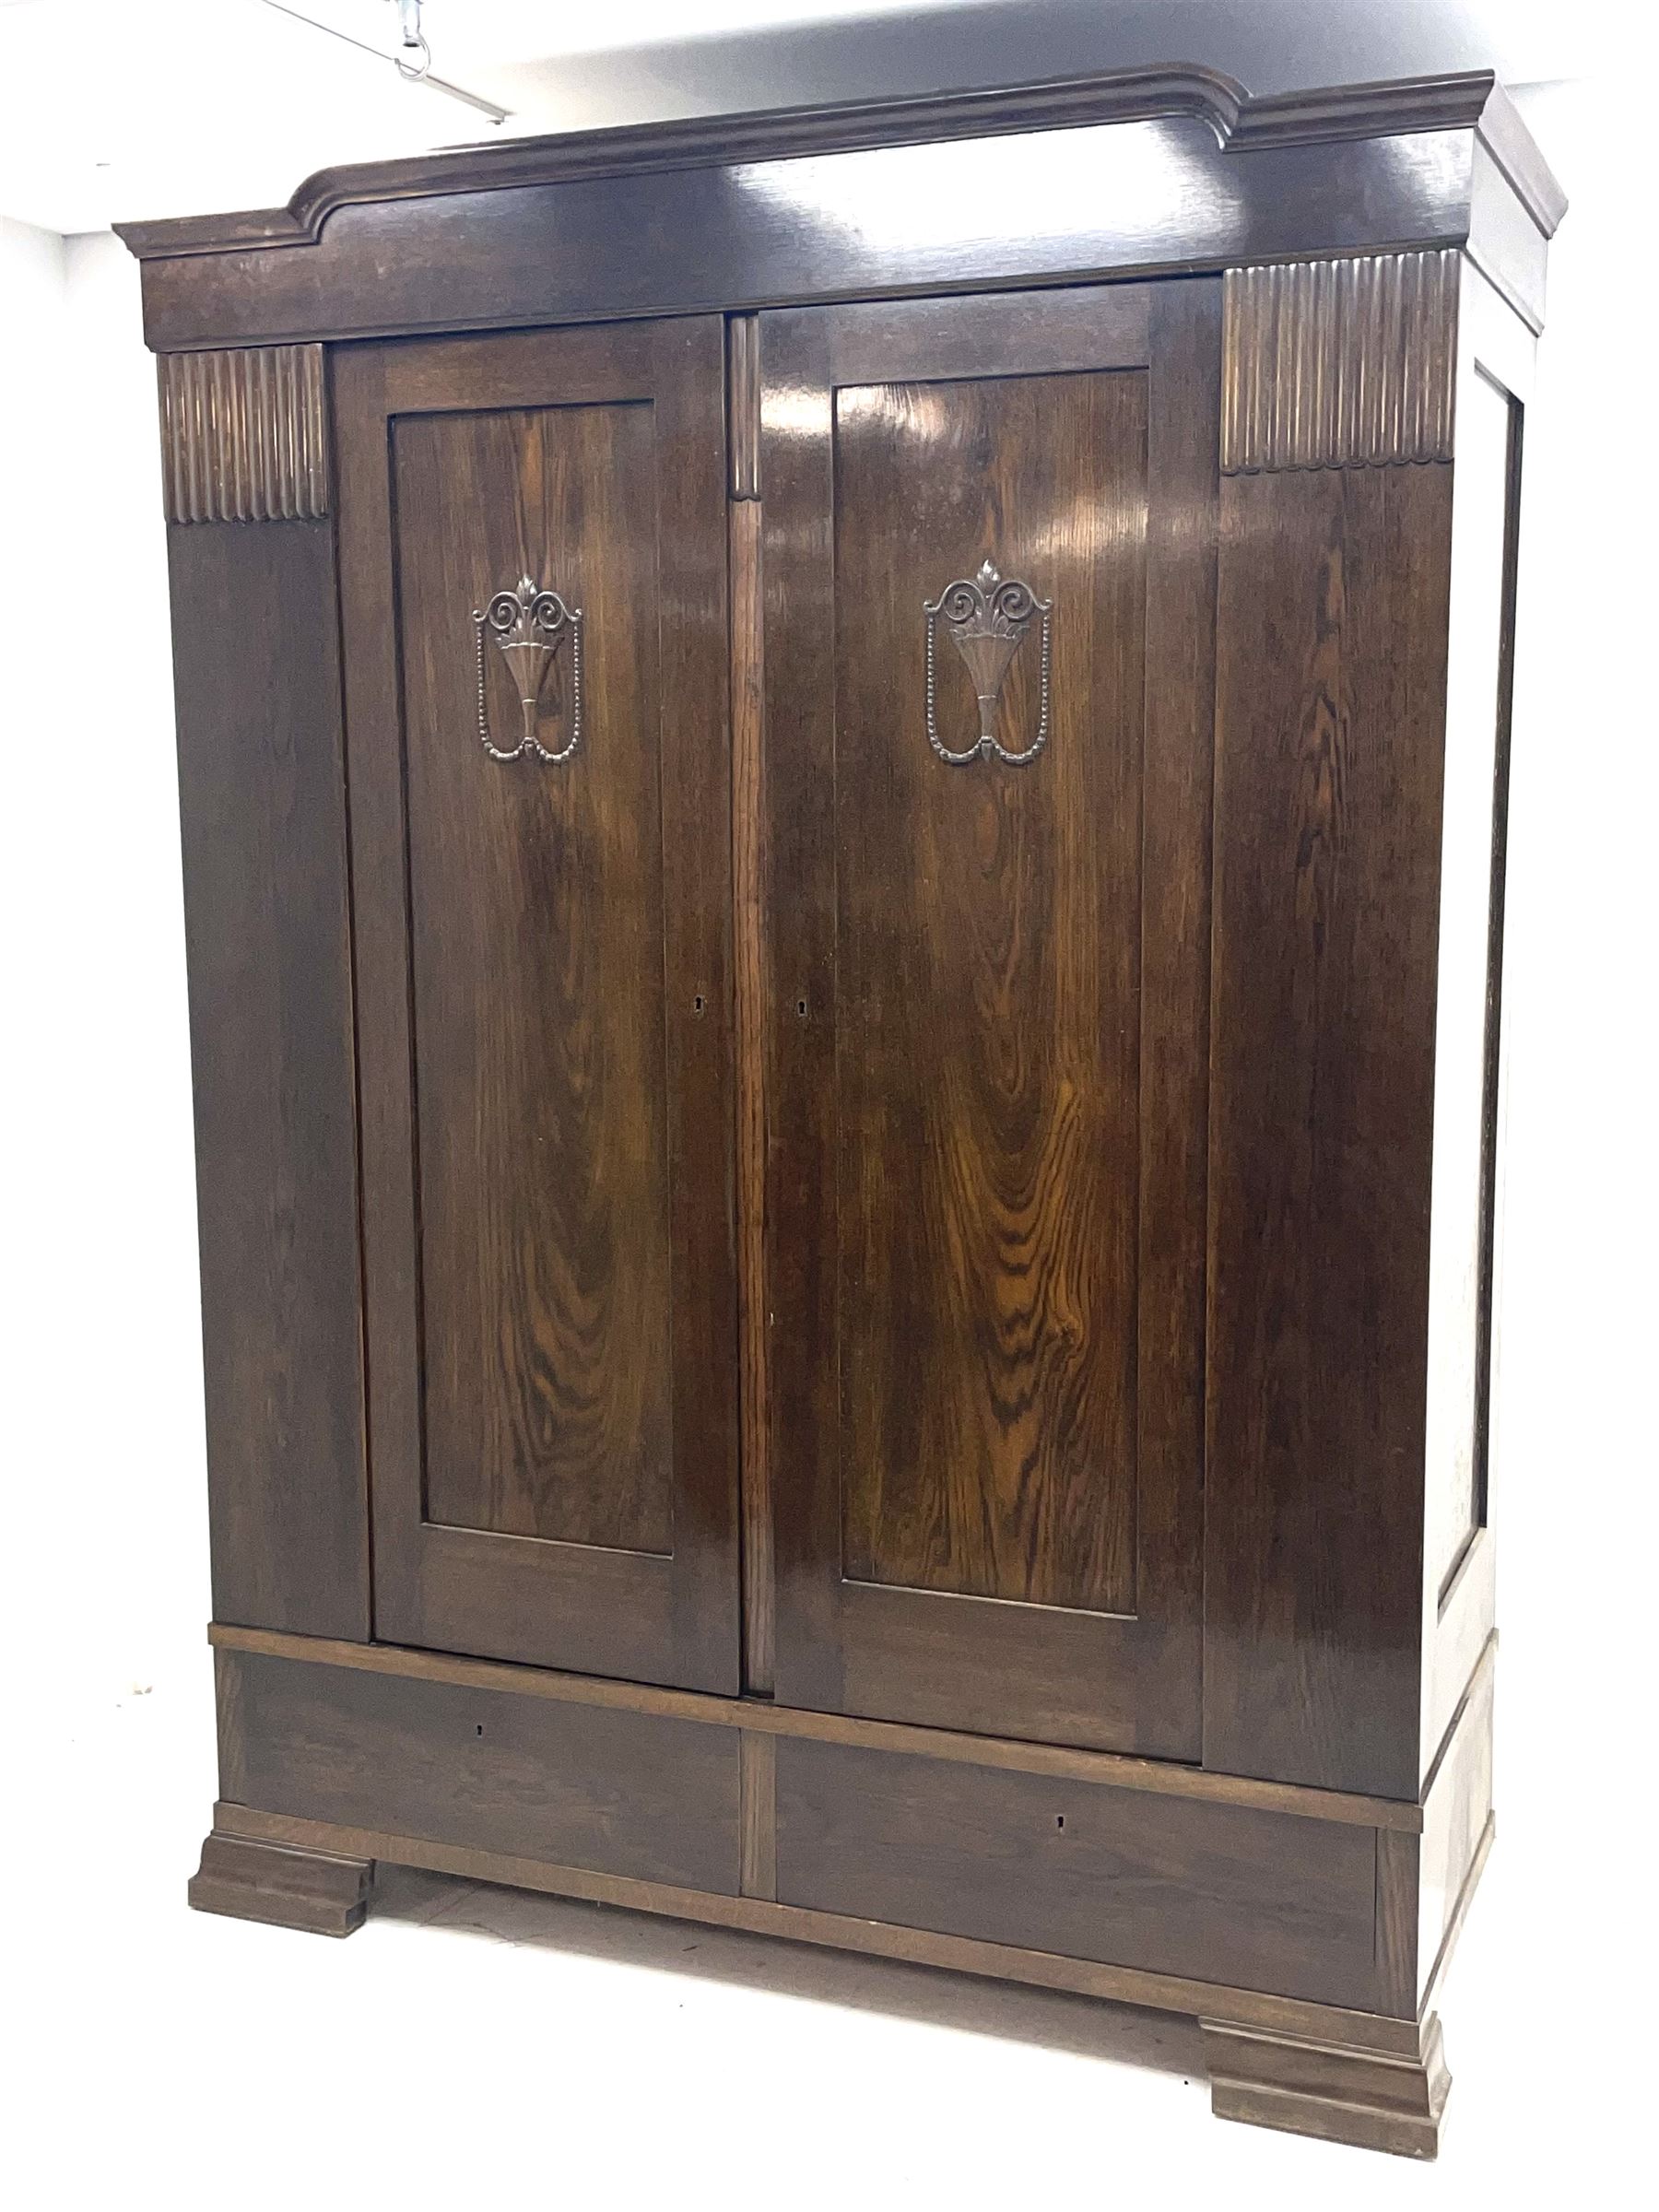 Early to mid 20th century oak double wardrobe - Image 5 of 5